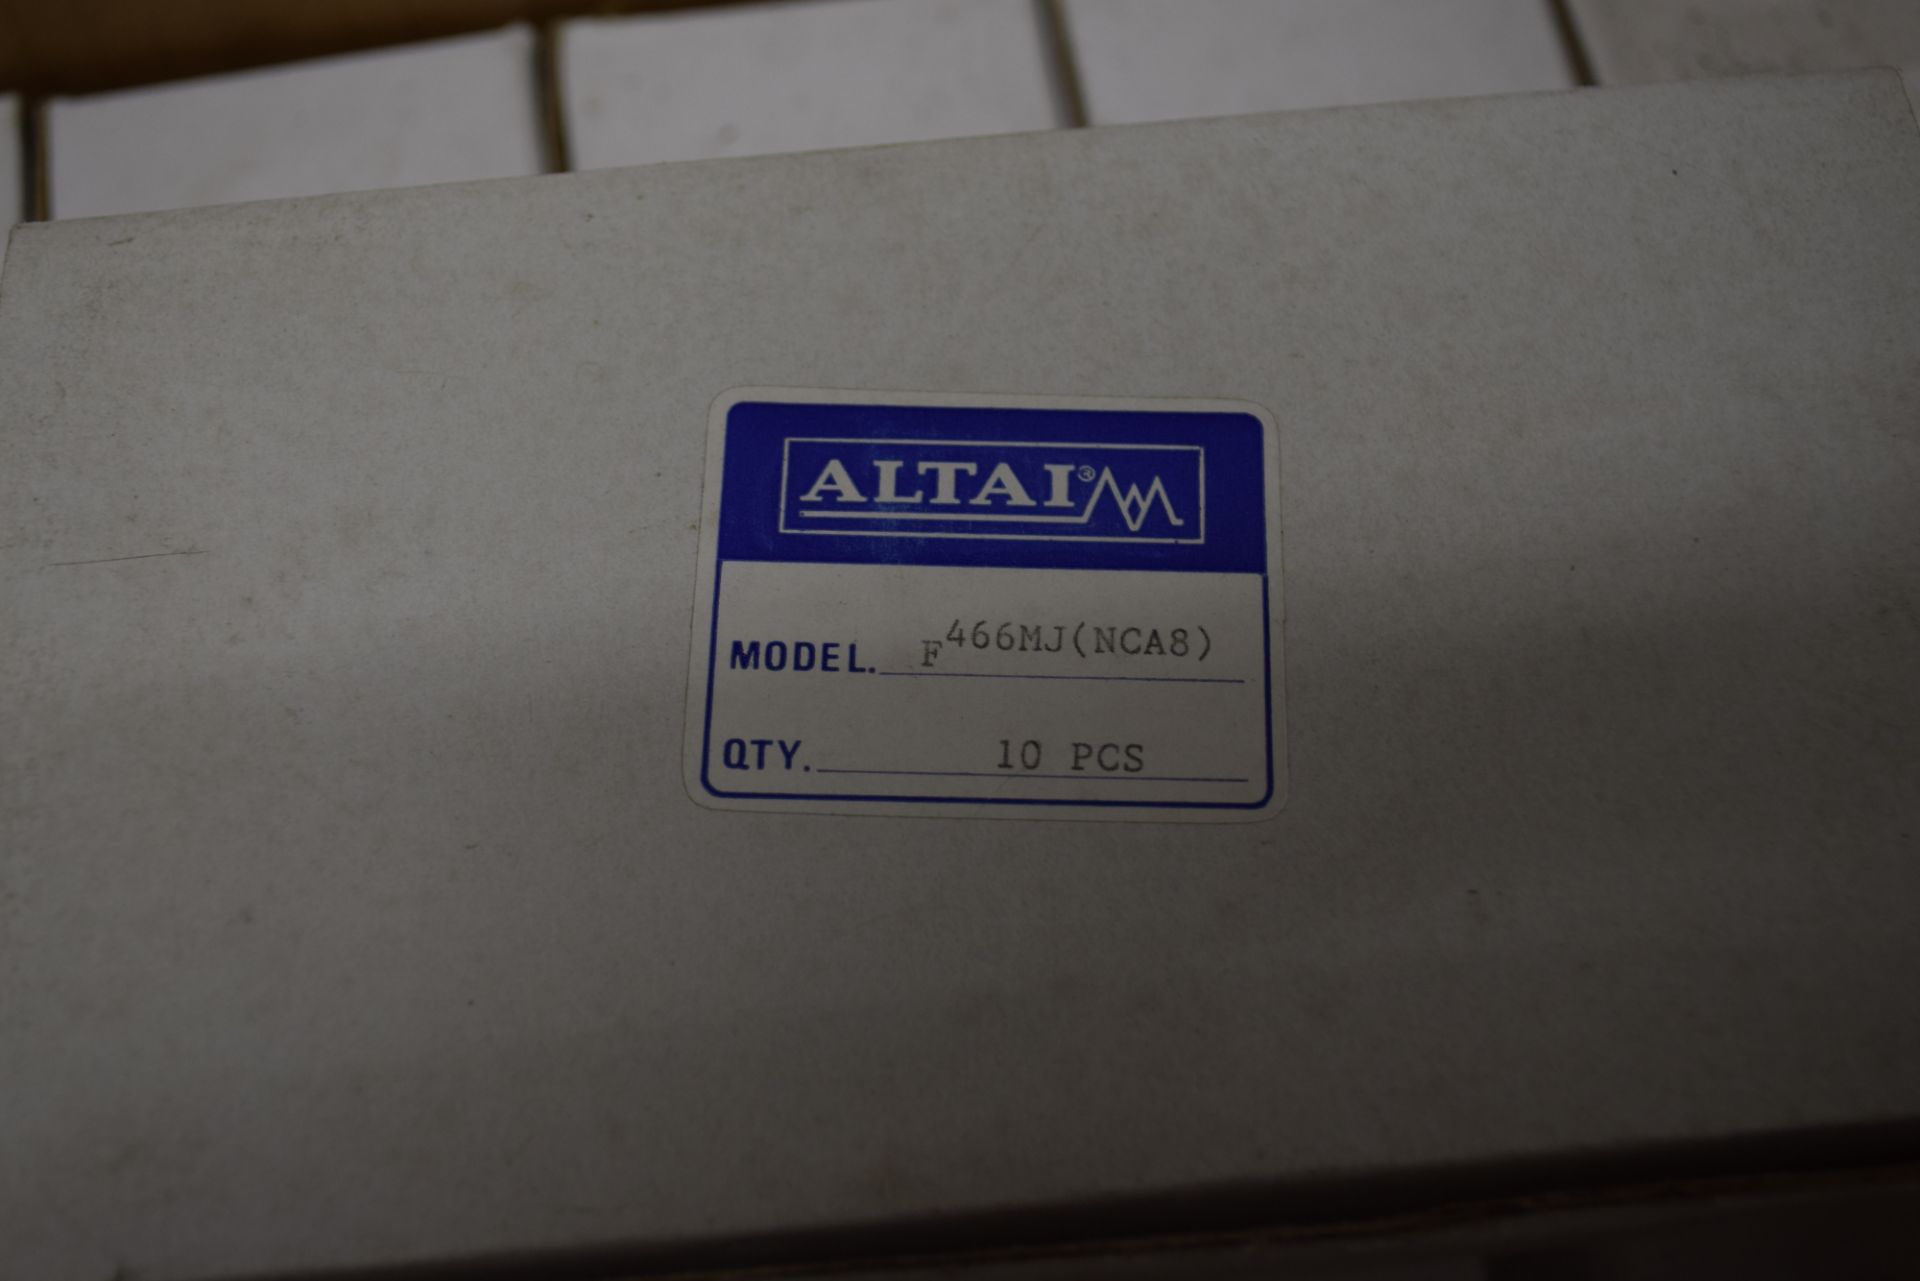 FIFTEEN BOXES OF ALTAI POWER TERMINALS, APPROX 10 PIECES PER BOX, MODEL NO F466MJ (NCA8) - Image 3 of 3